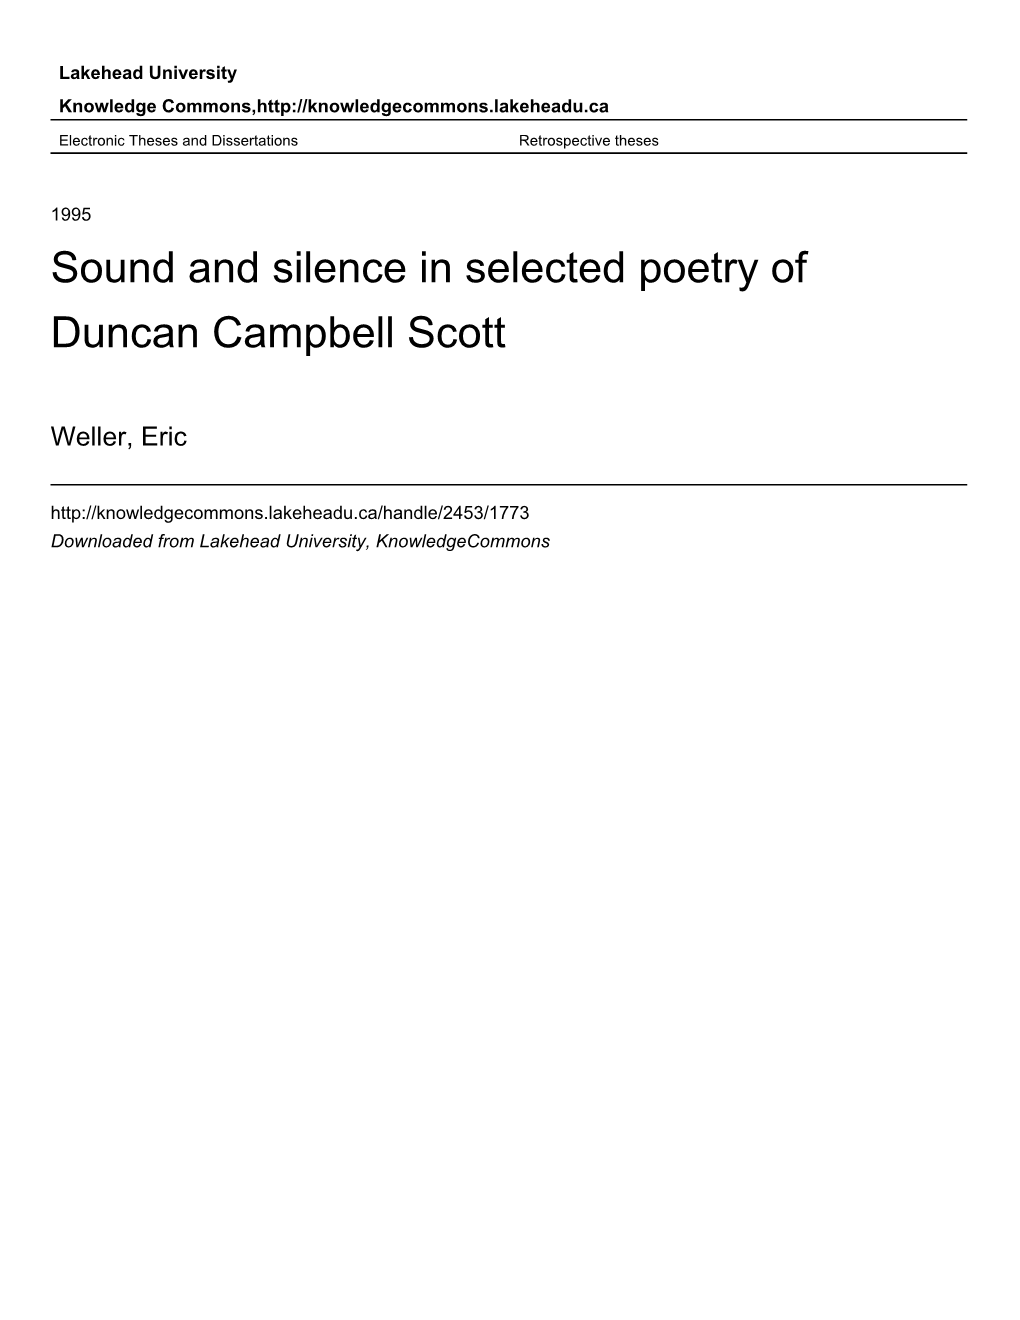 Sound and Silence in Selected Poetry of Duncan Campbell Scott